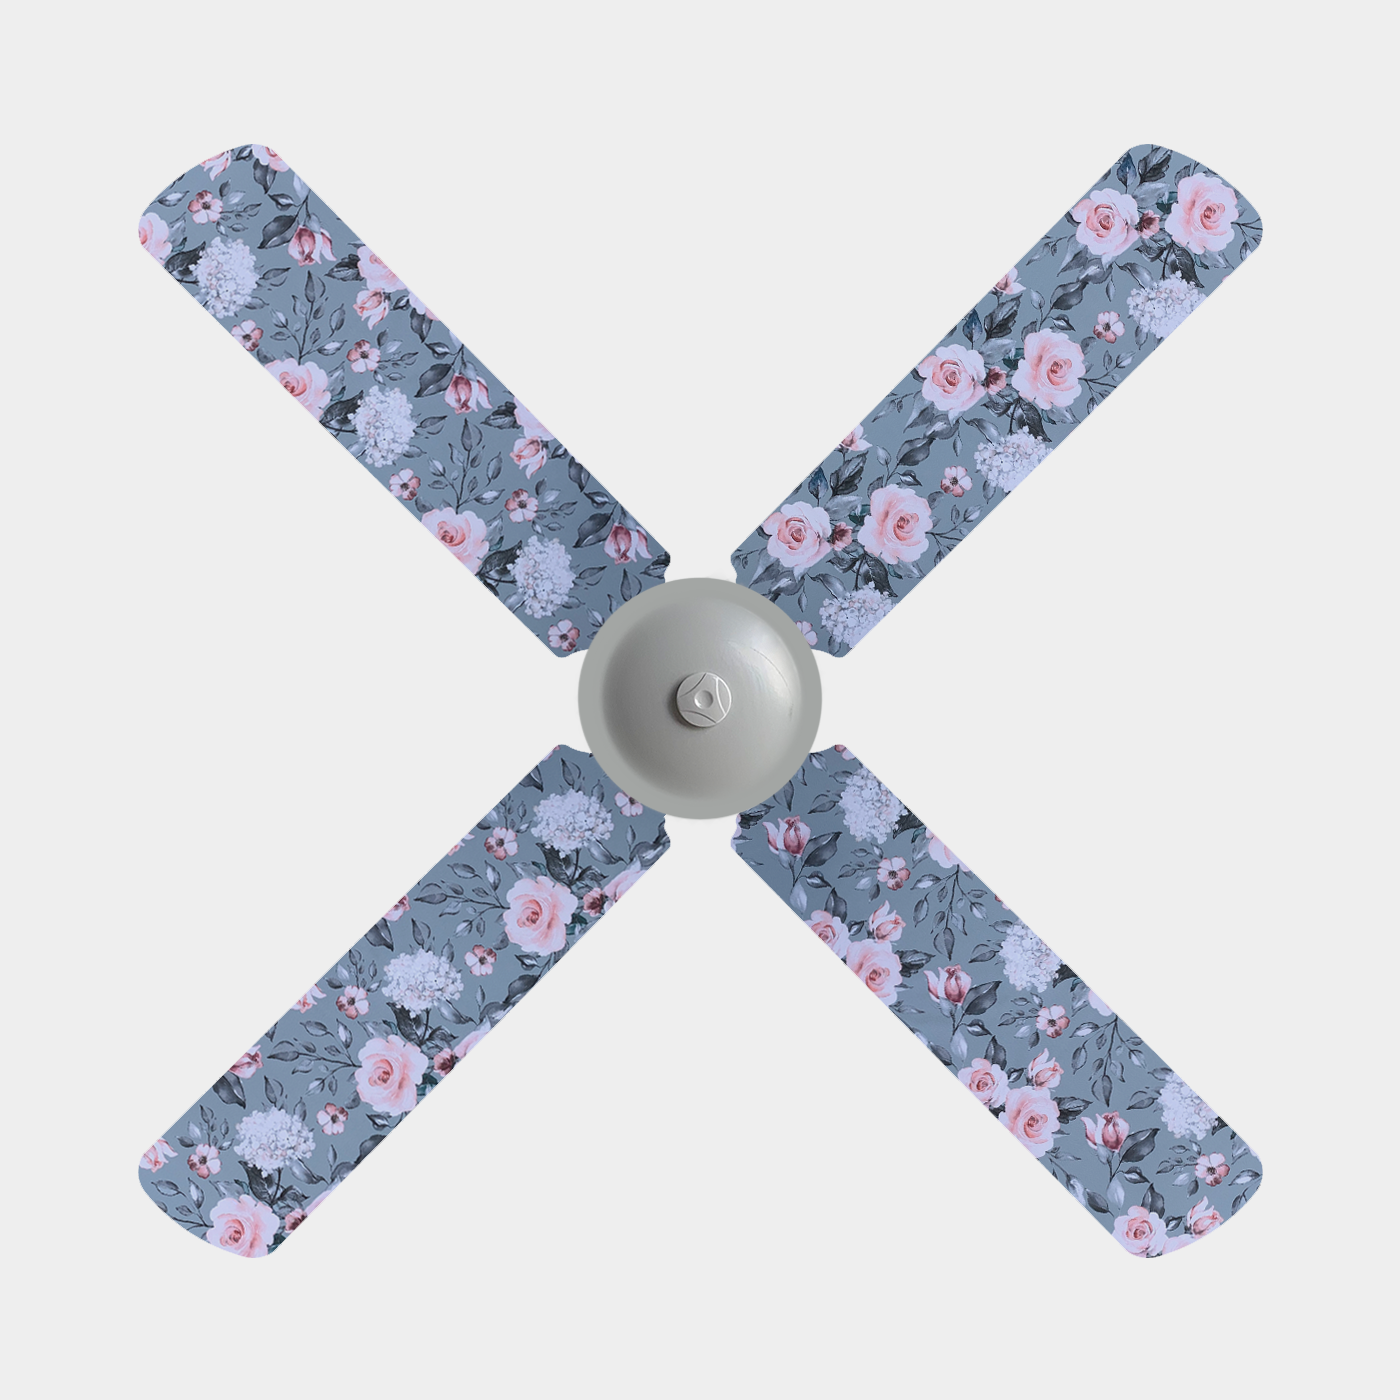 Ceiling fan covers with grey background and pink and white flowers on four blade ceiling fan